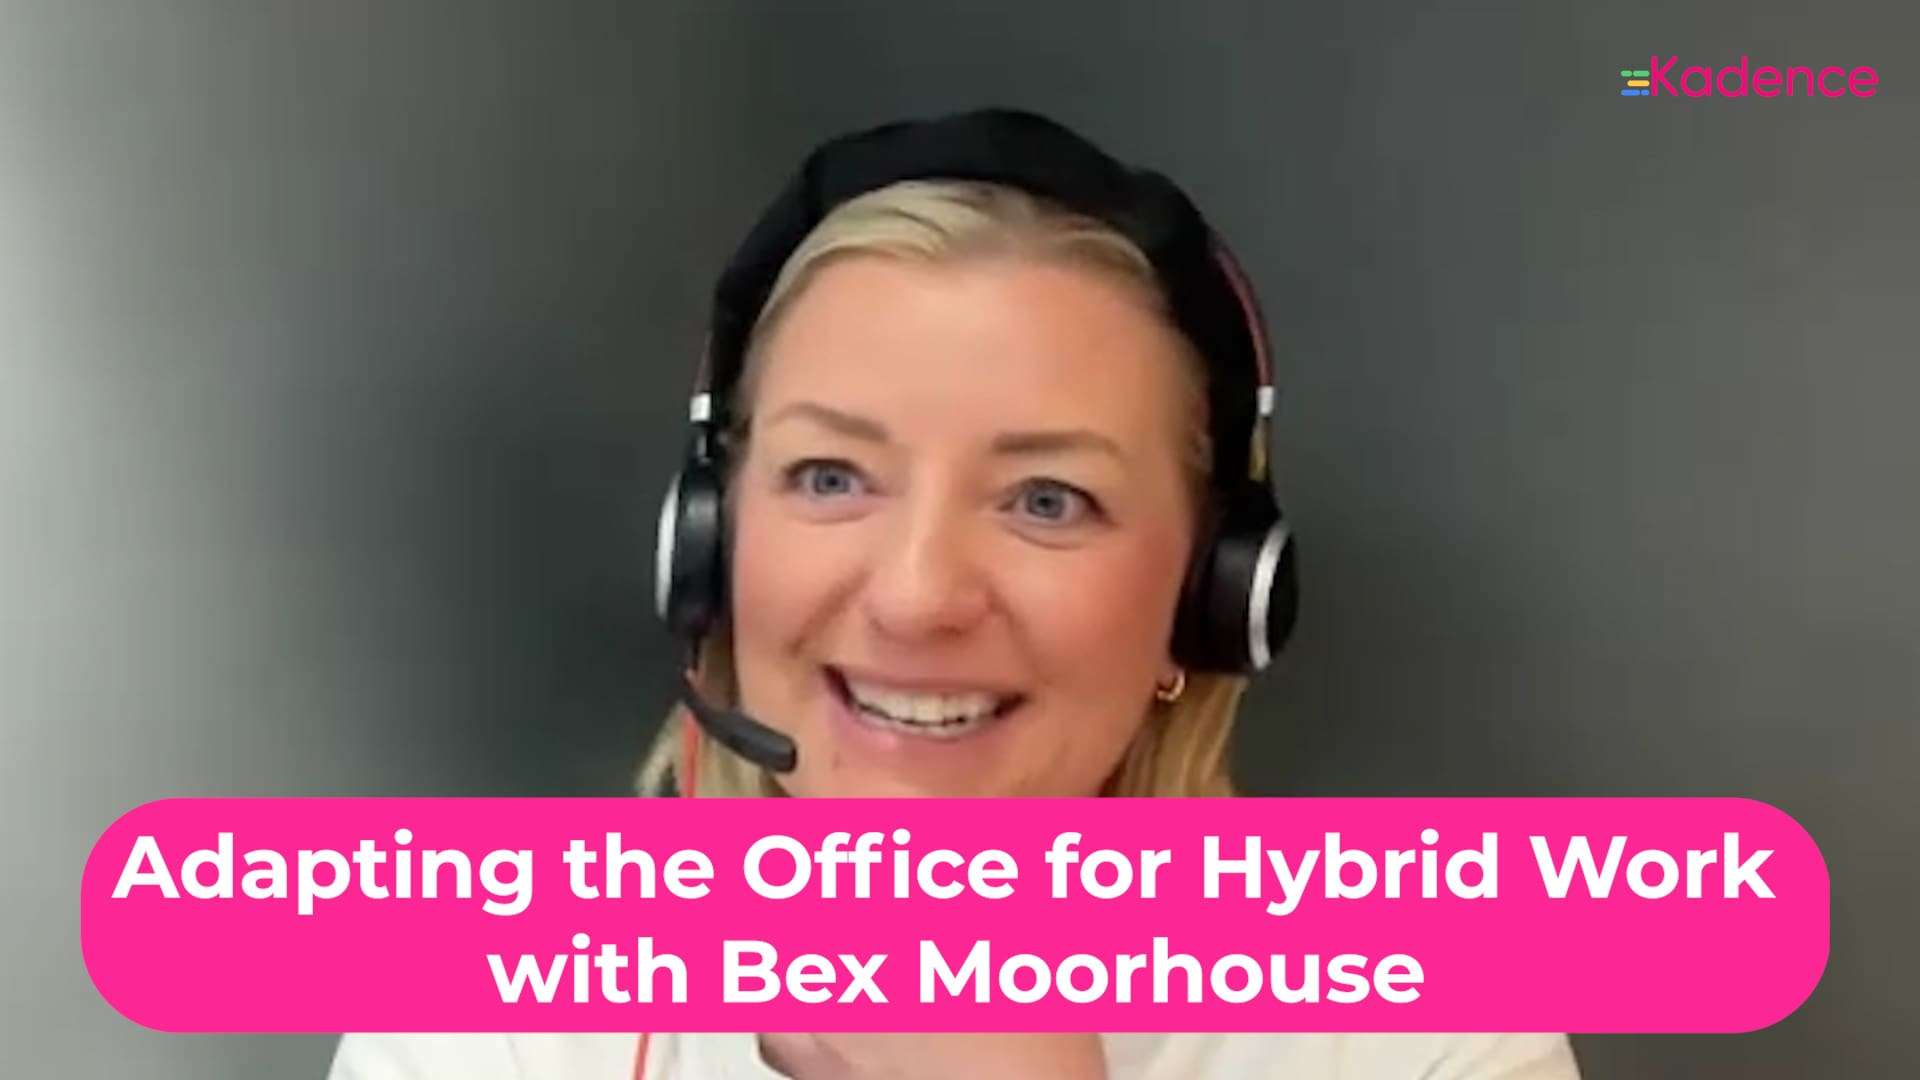 Five Strategies to Adapt Your Office Space for Hybrid Work with Bex Moorhouse